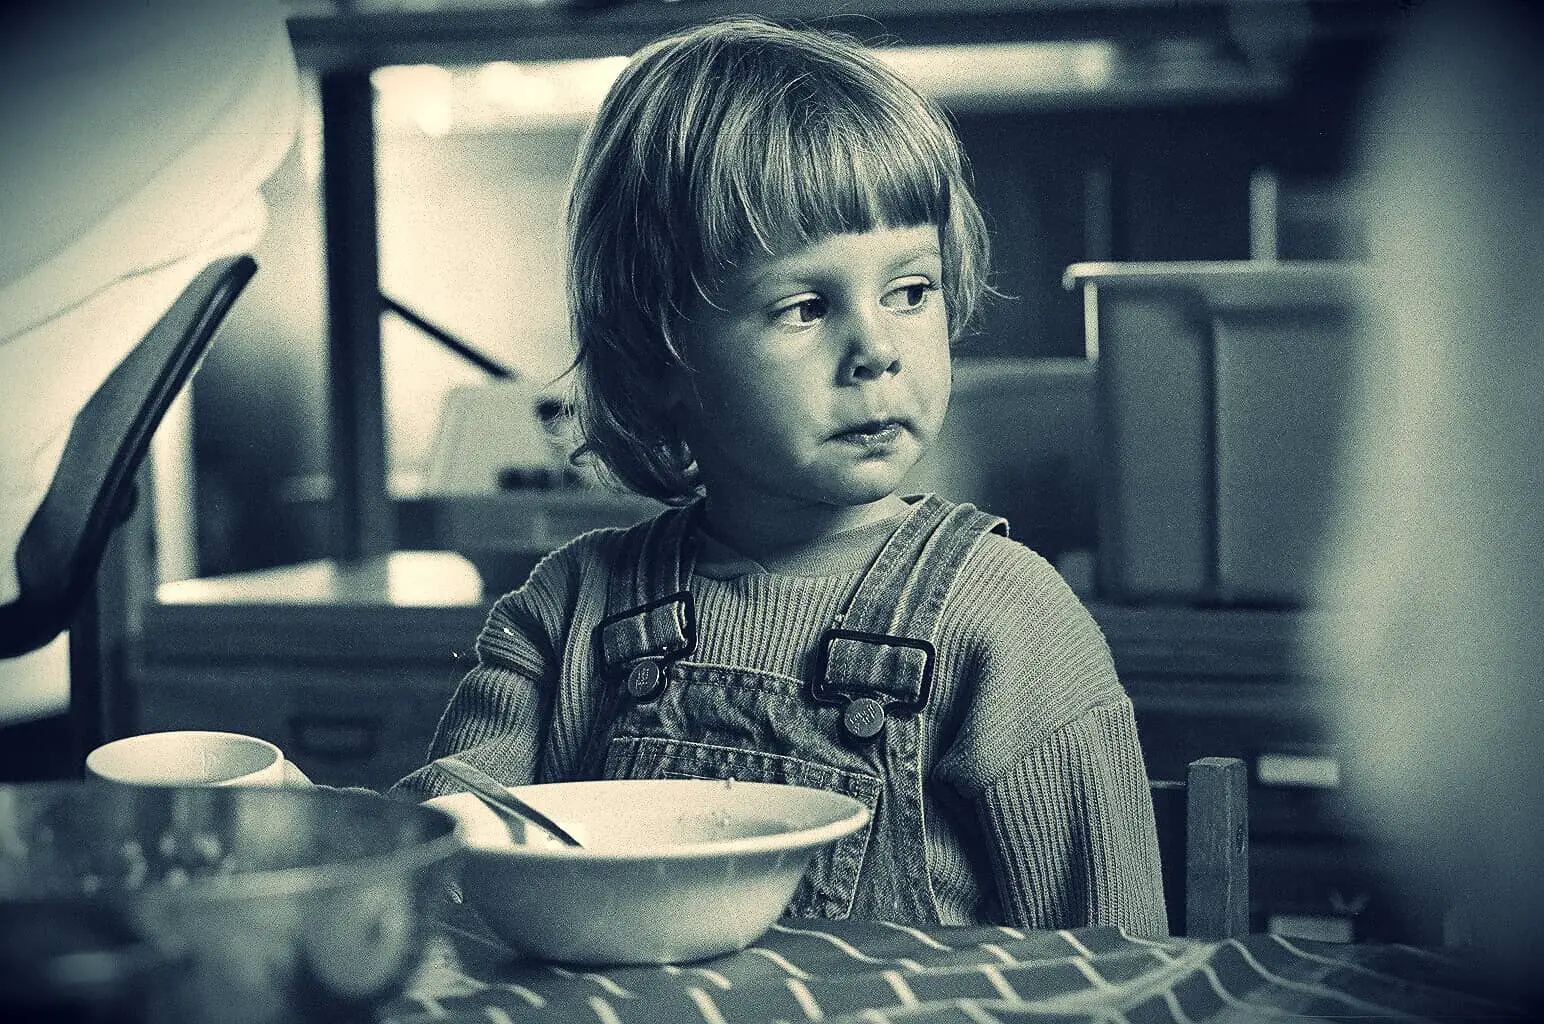 Child eating breakfast - black and white photo